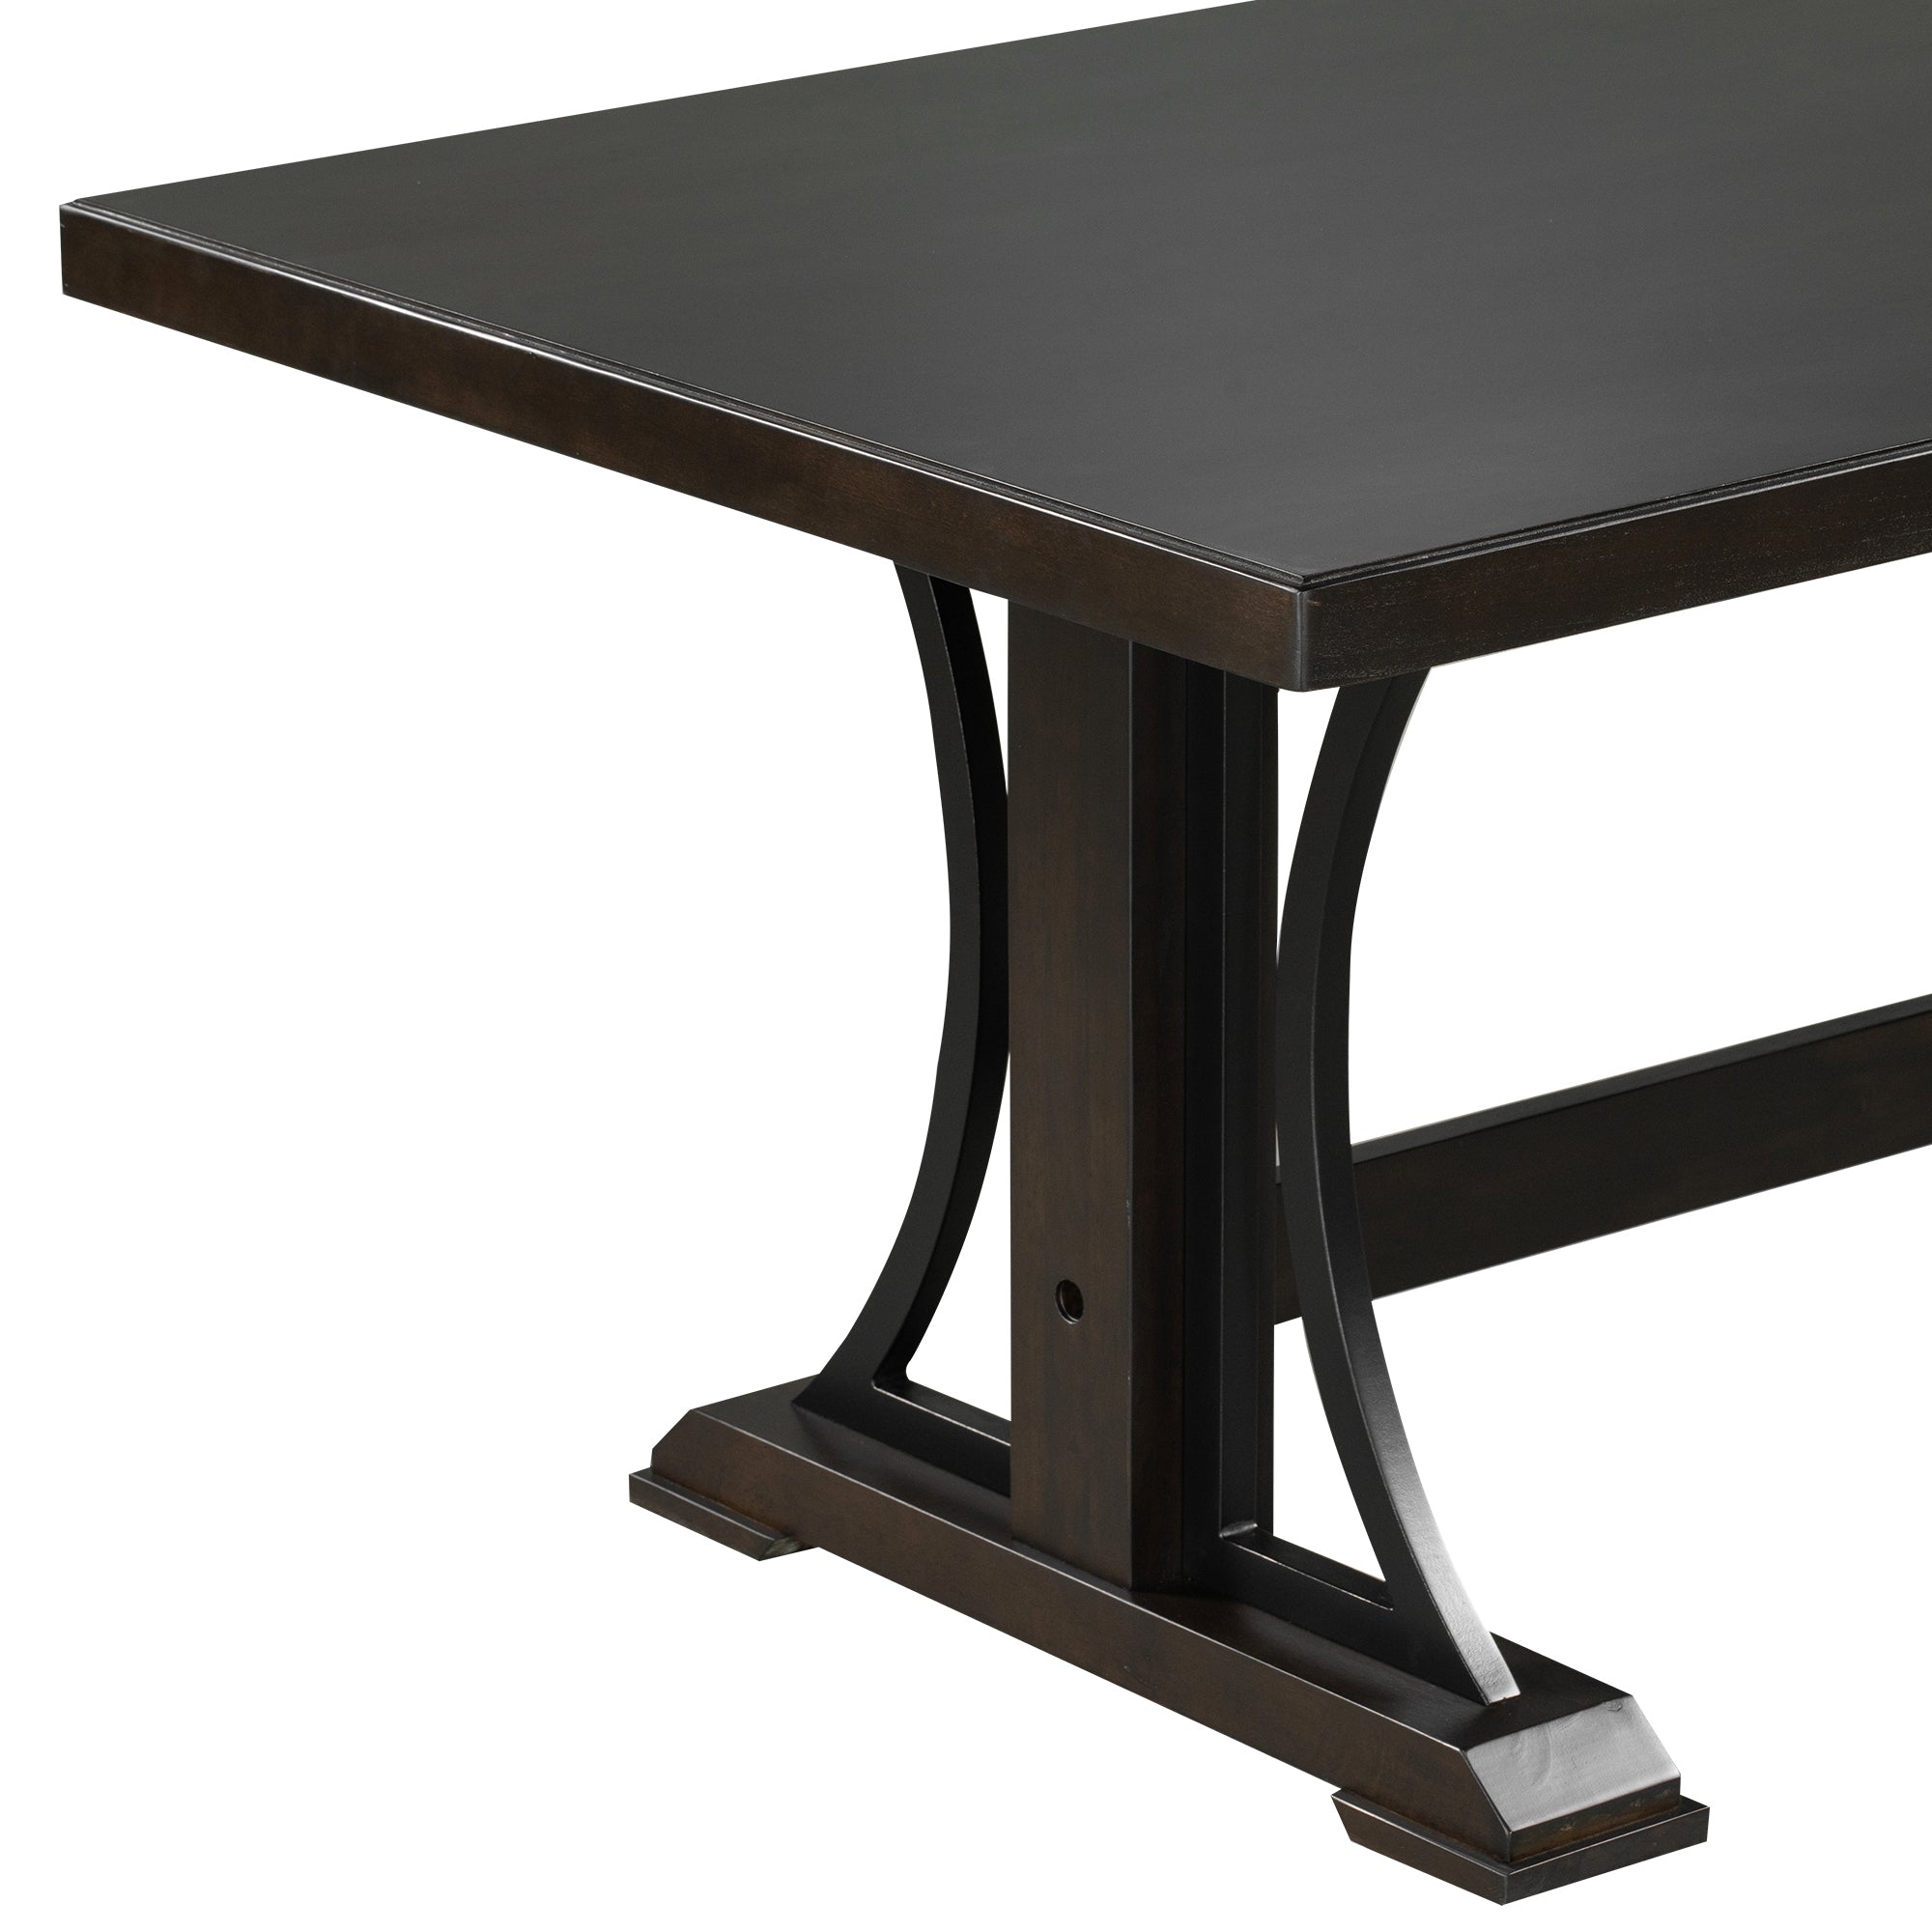 Retro Style Dining Table 78” Wood Rectangular Table, Seats up to 8 - Espresso